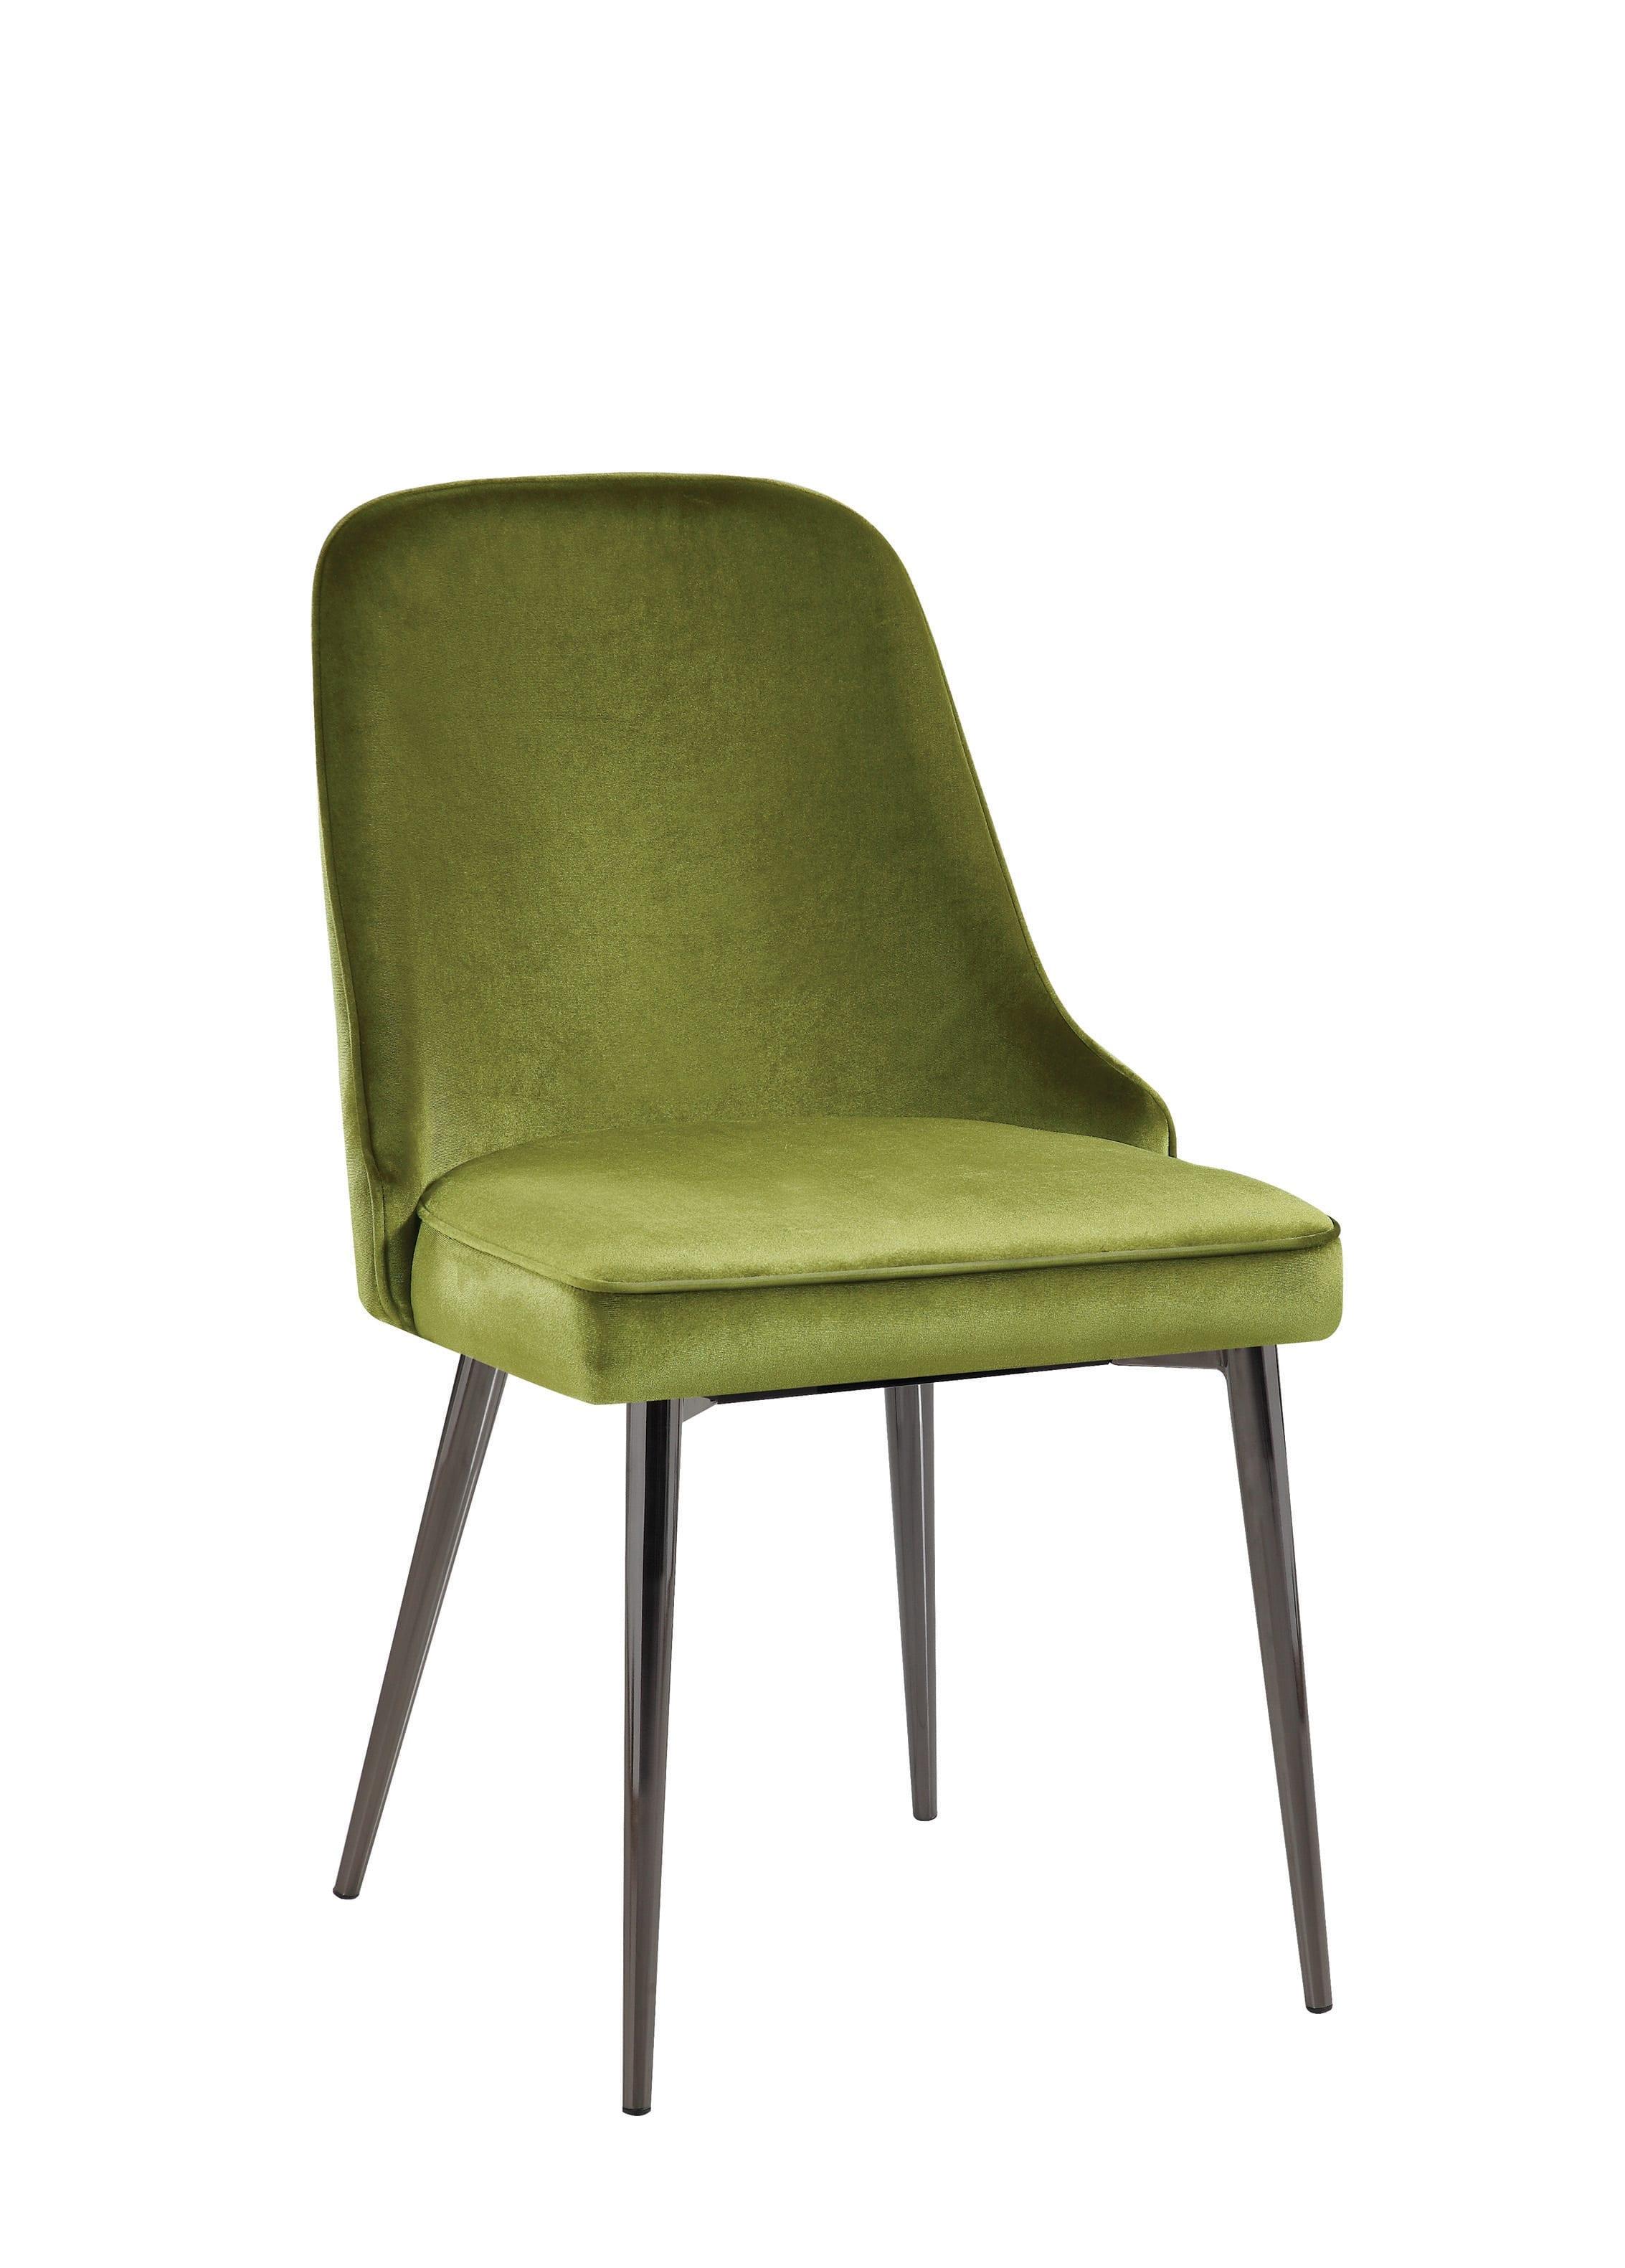 Modern Dining Chair Riverbank 107952 in Green Fabric